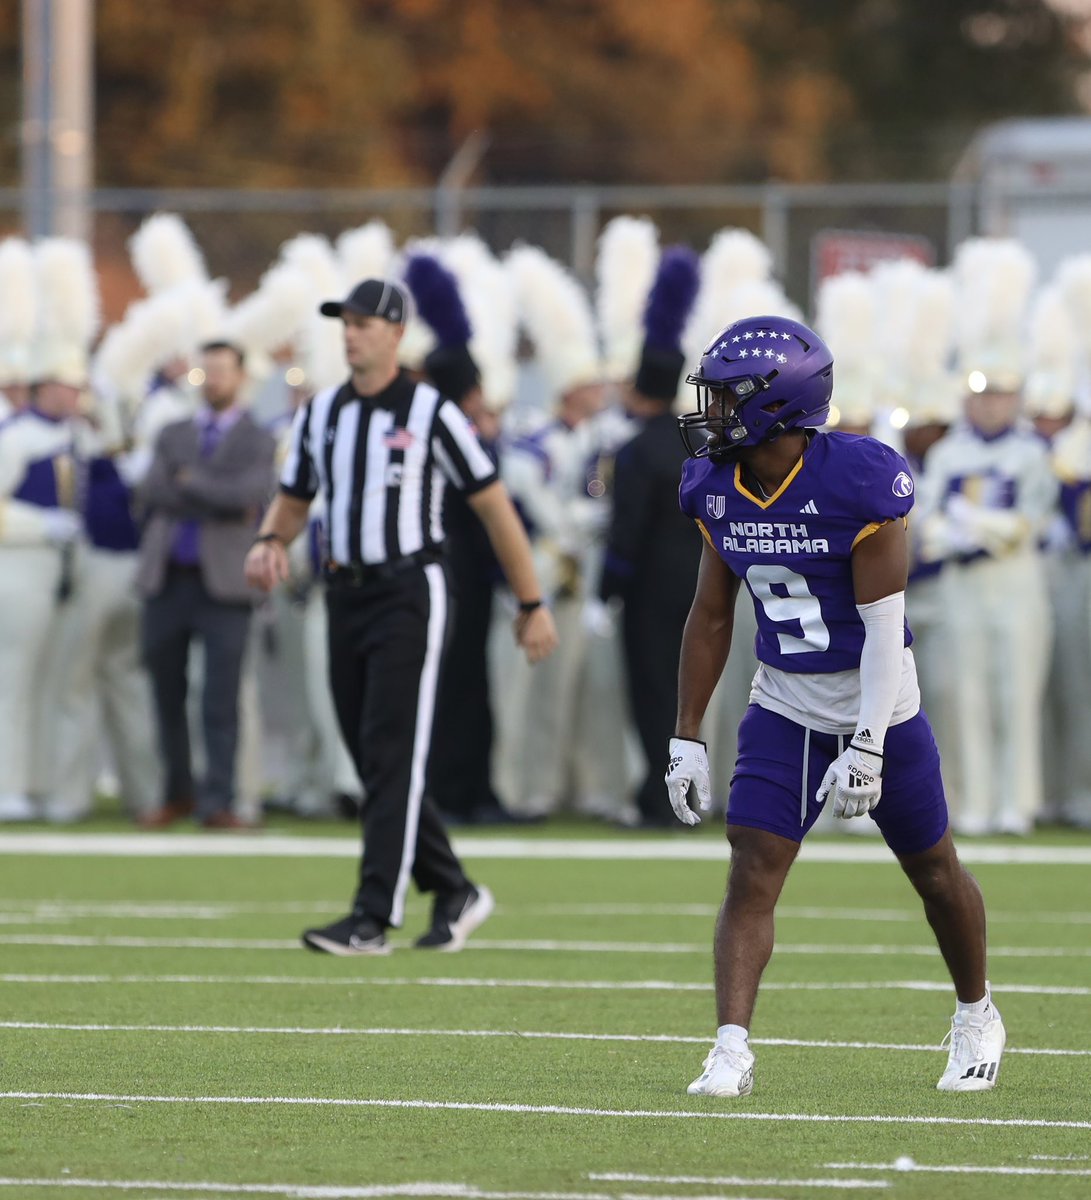 #AGTG🙏🏾 Blessed to receive an offer from The University of North Alabama @SAMIEPARKER @UNAFootball @Coach_FredM @lhsvikingsfbrec @CarterVikingsFB @CoachC2588 @RecruitGeorgia